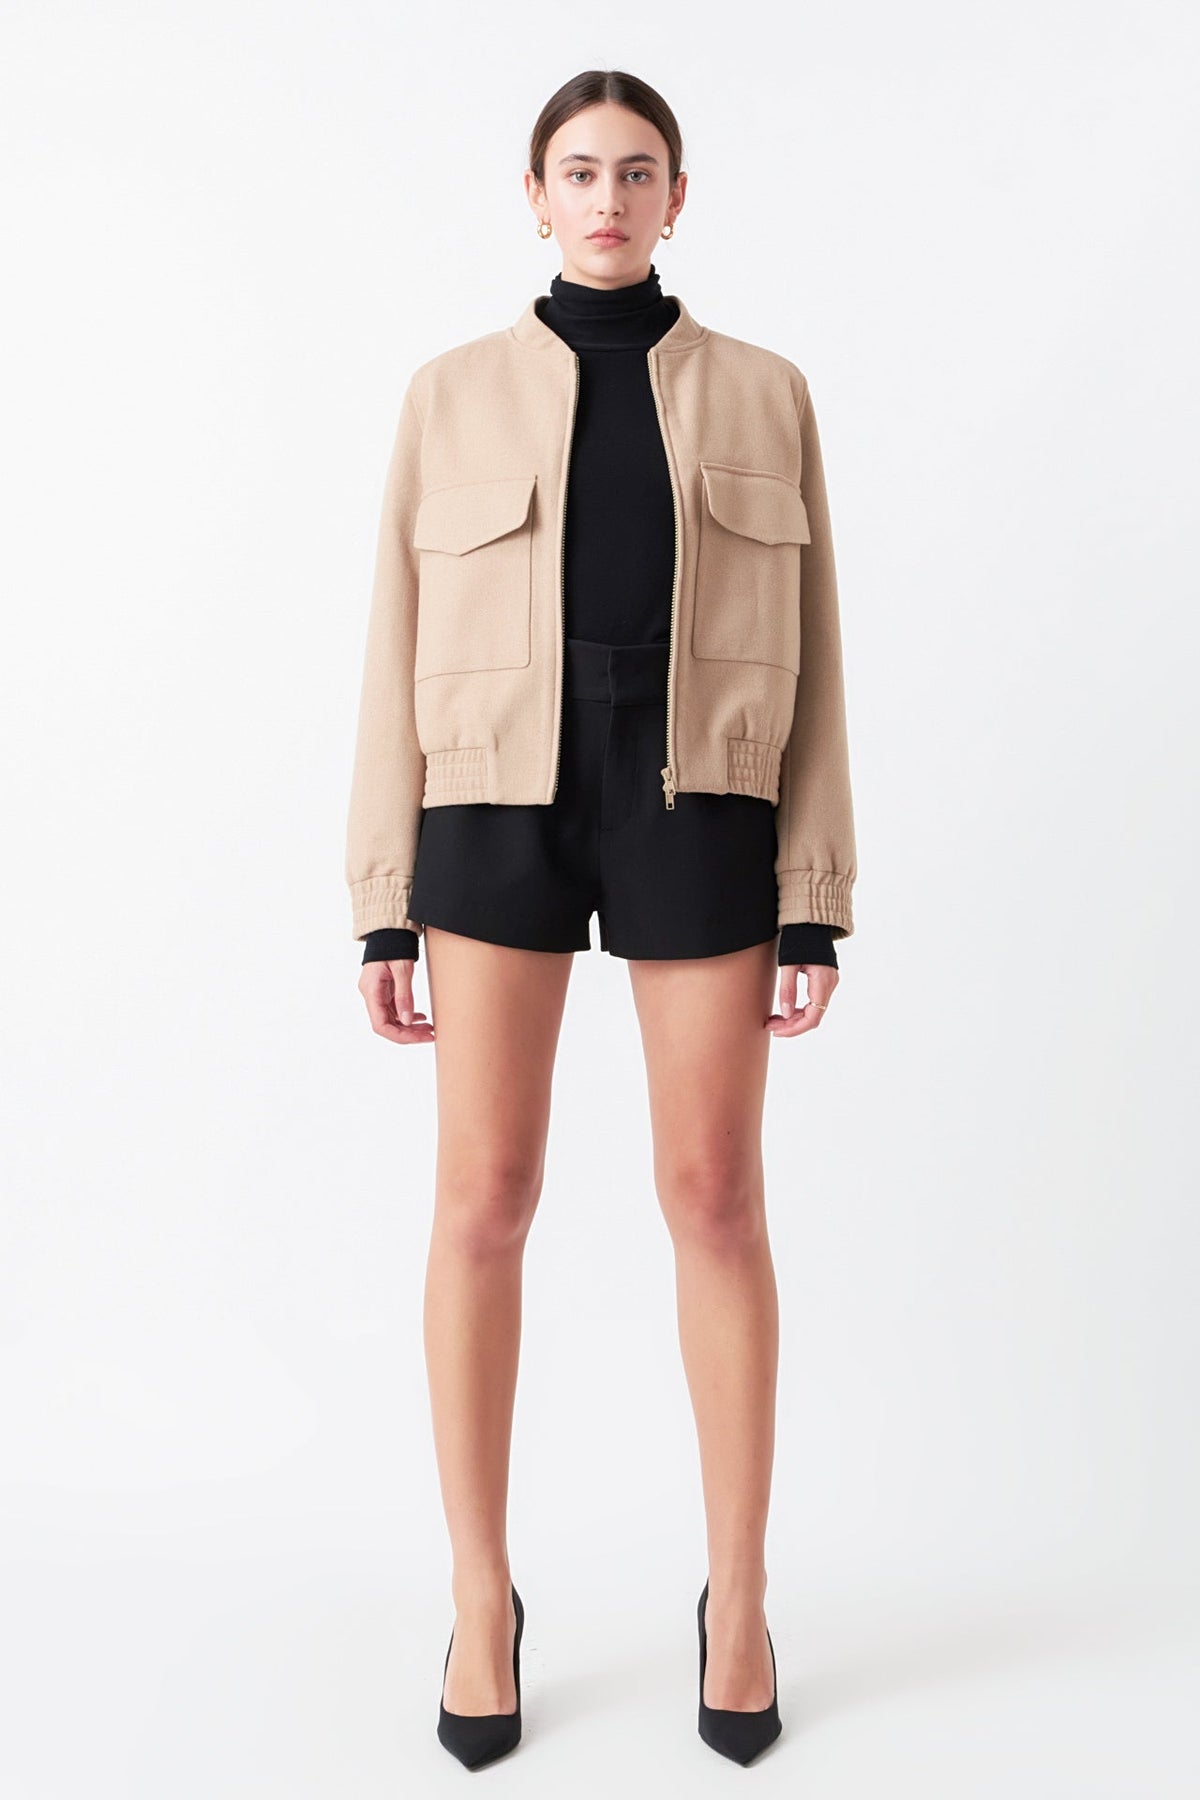 ENDLESS ROSE - Wool Bomber Pocket Jacket - JACKETS available at Objectrare